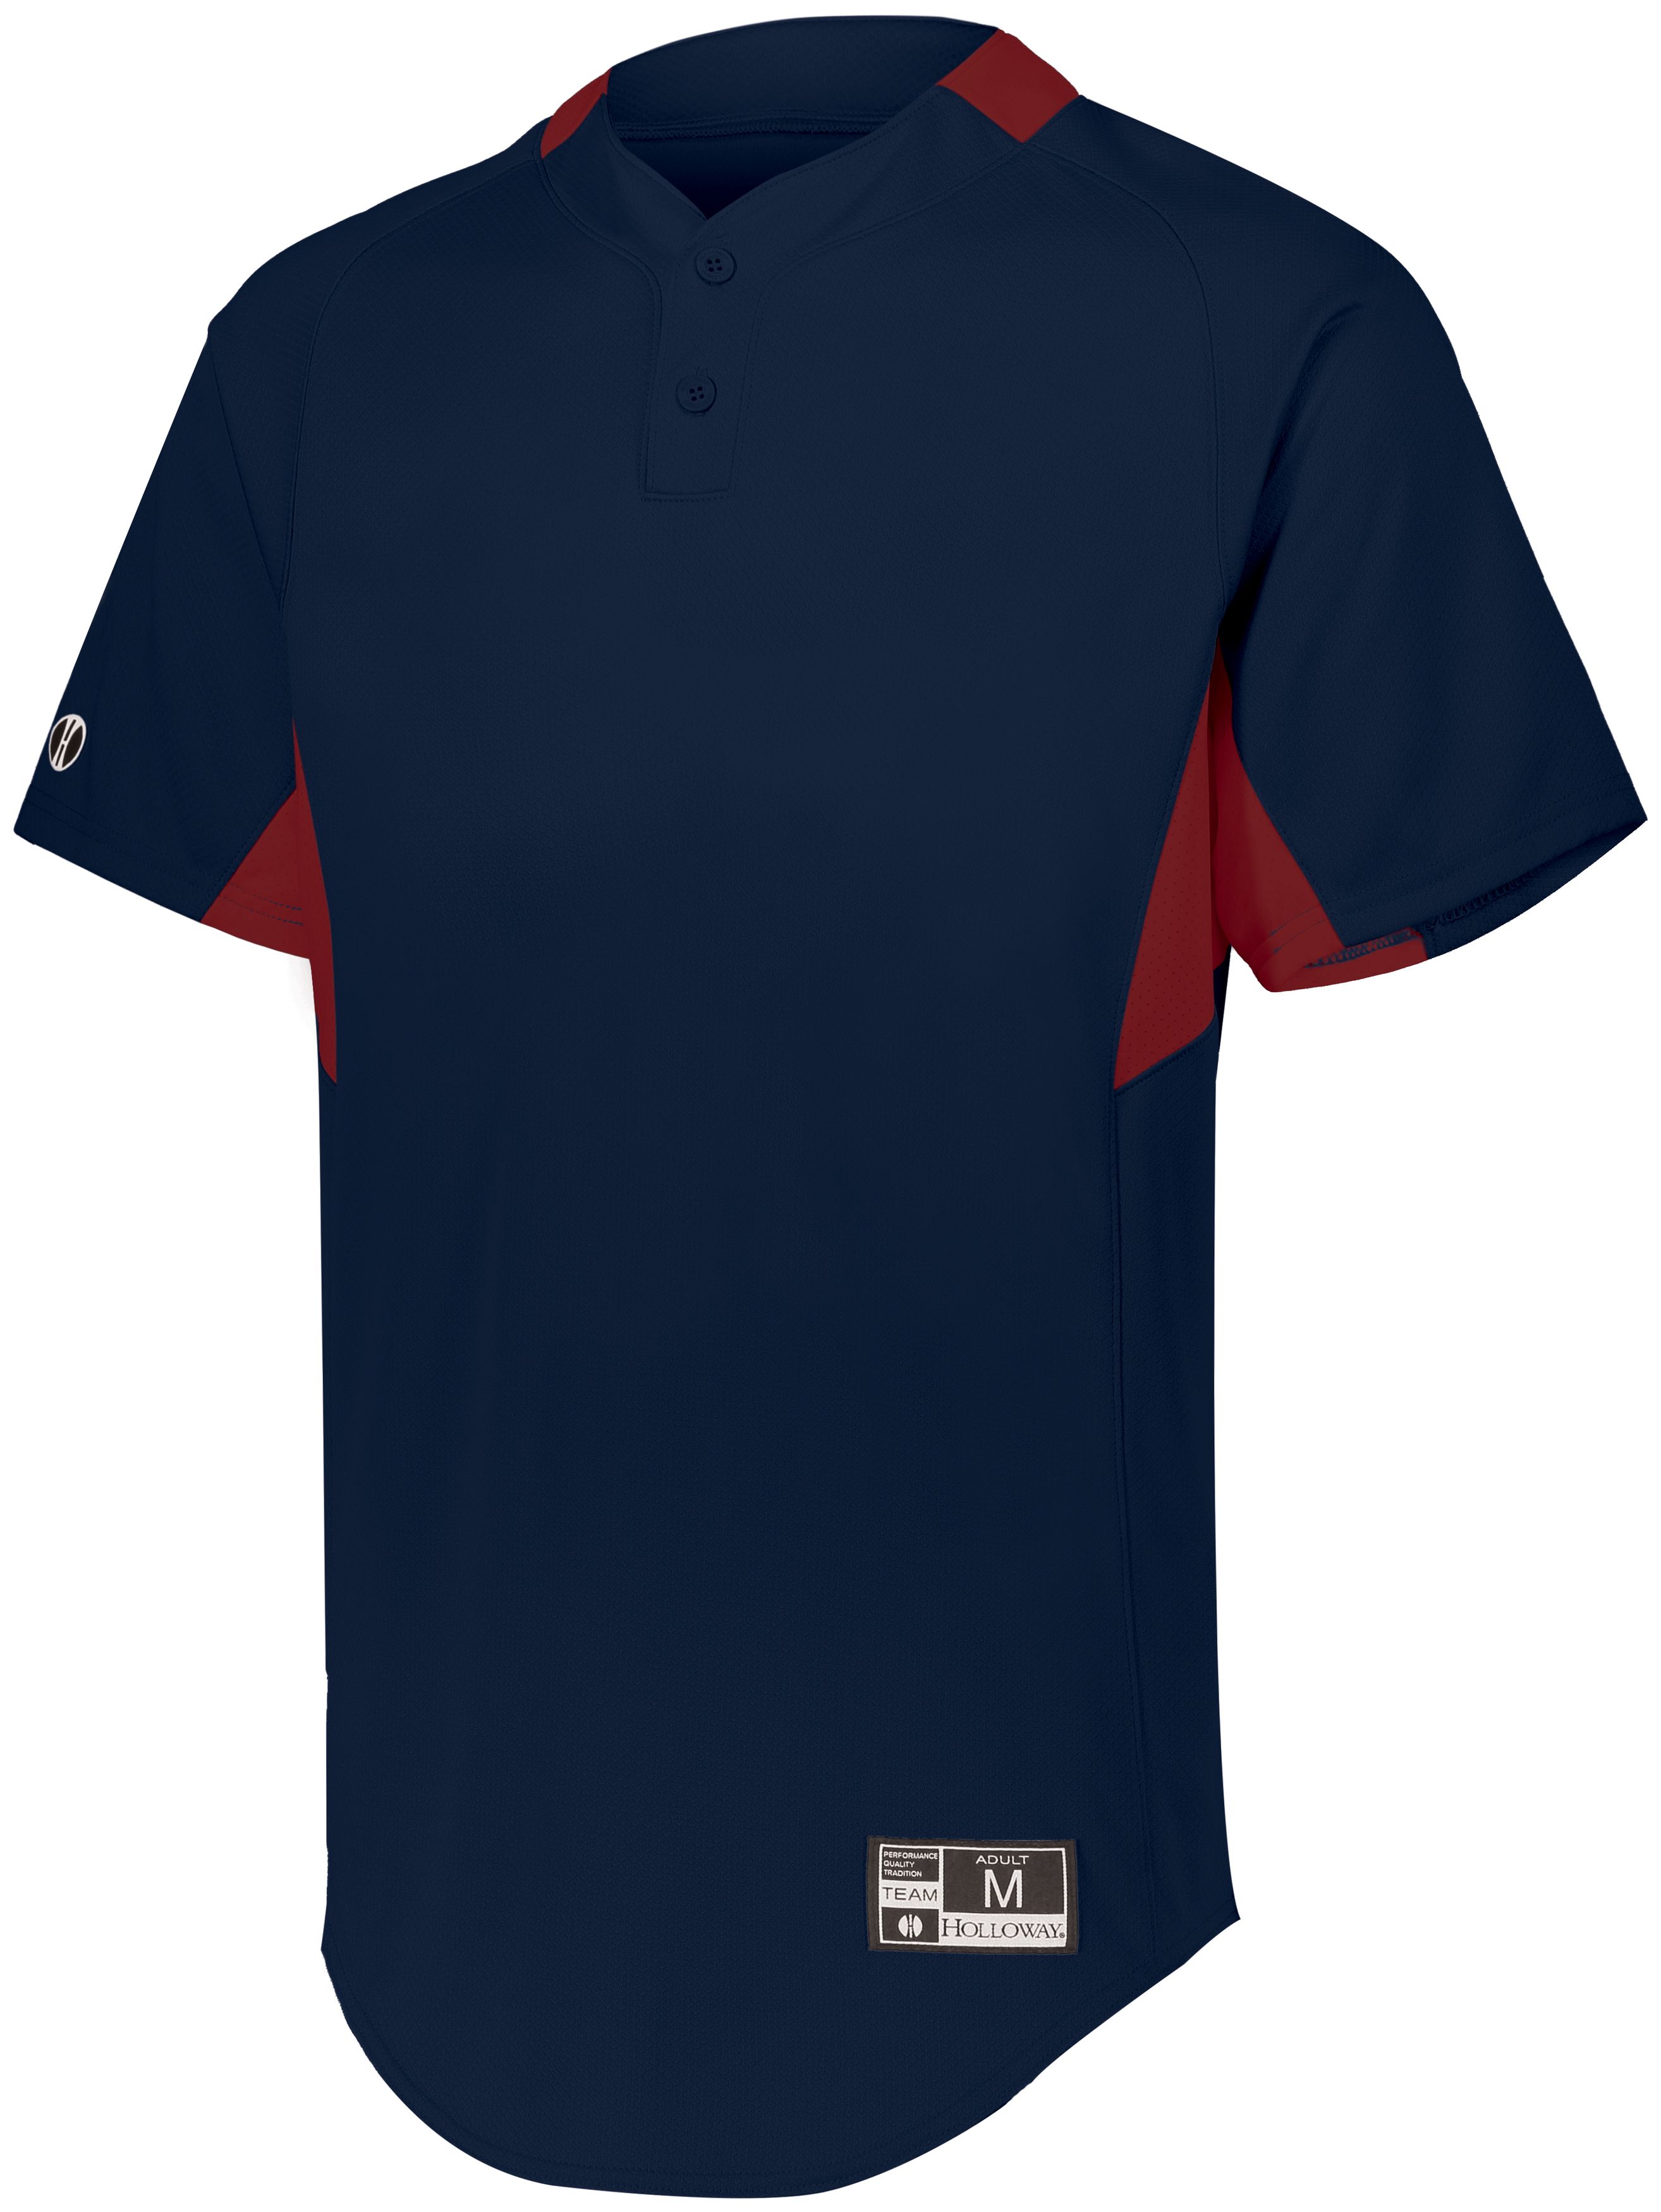 click to view Navy/Scarlet